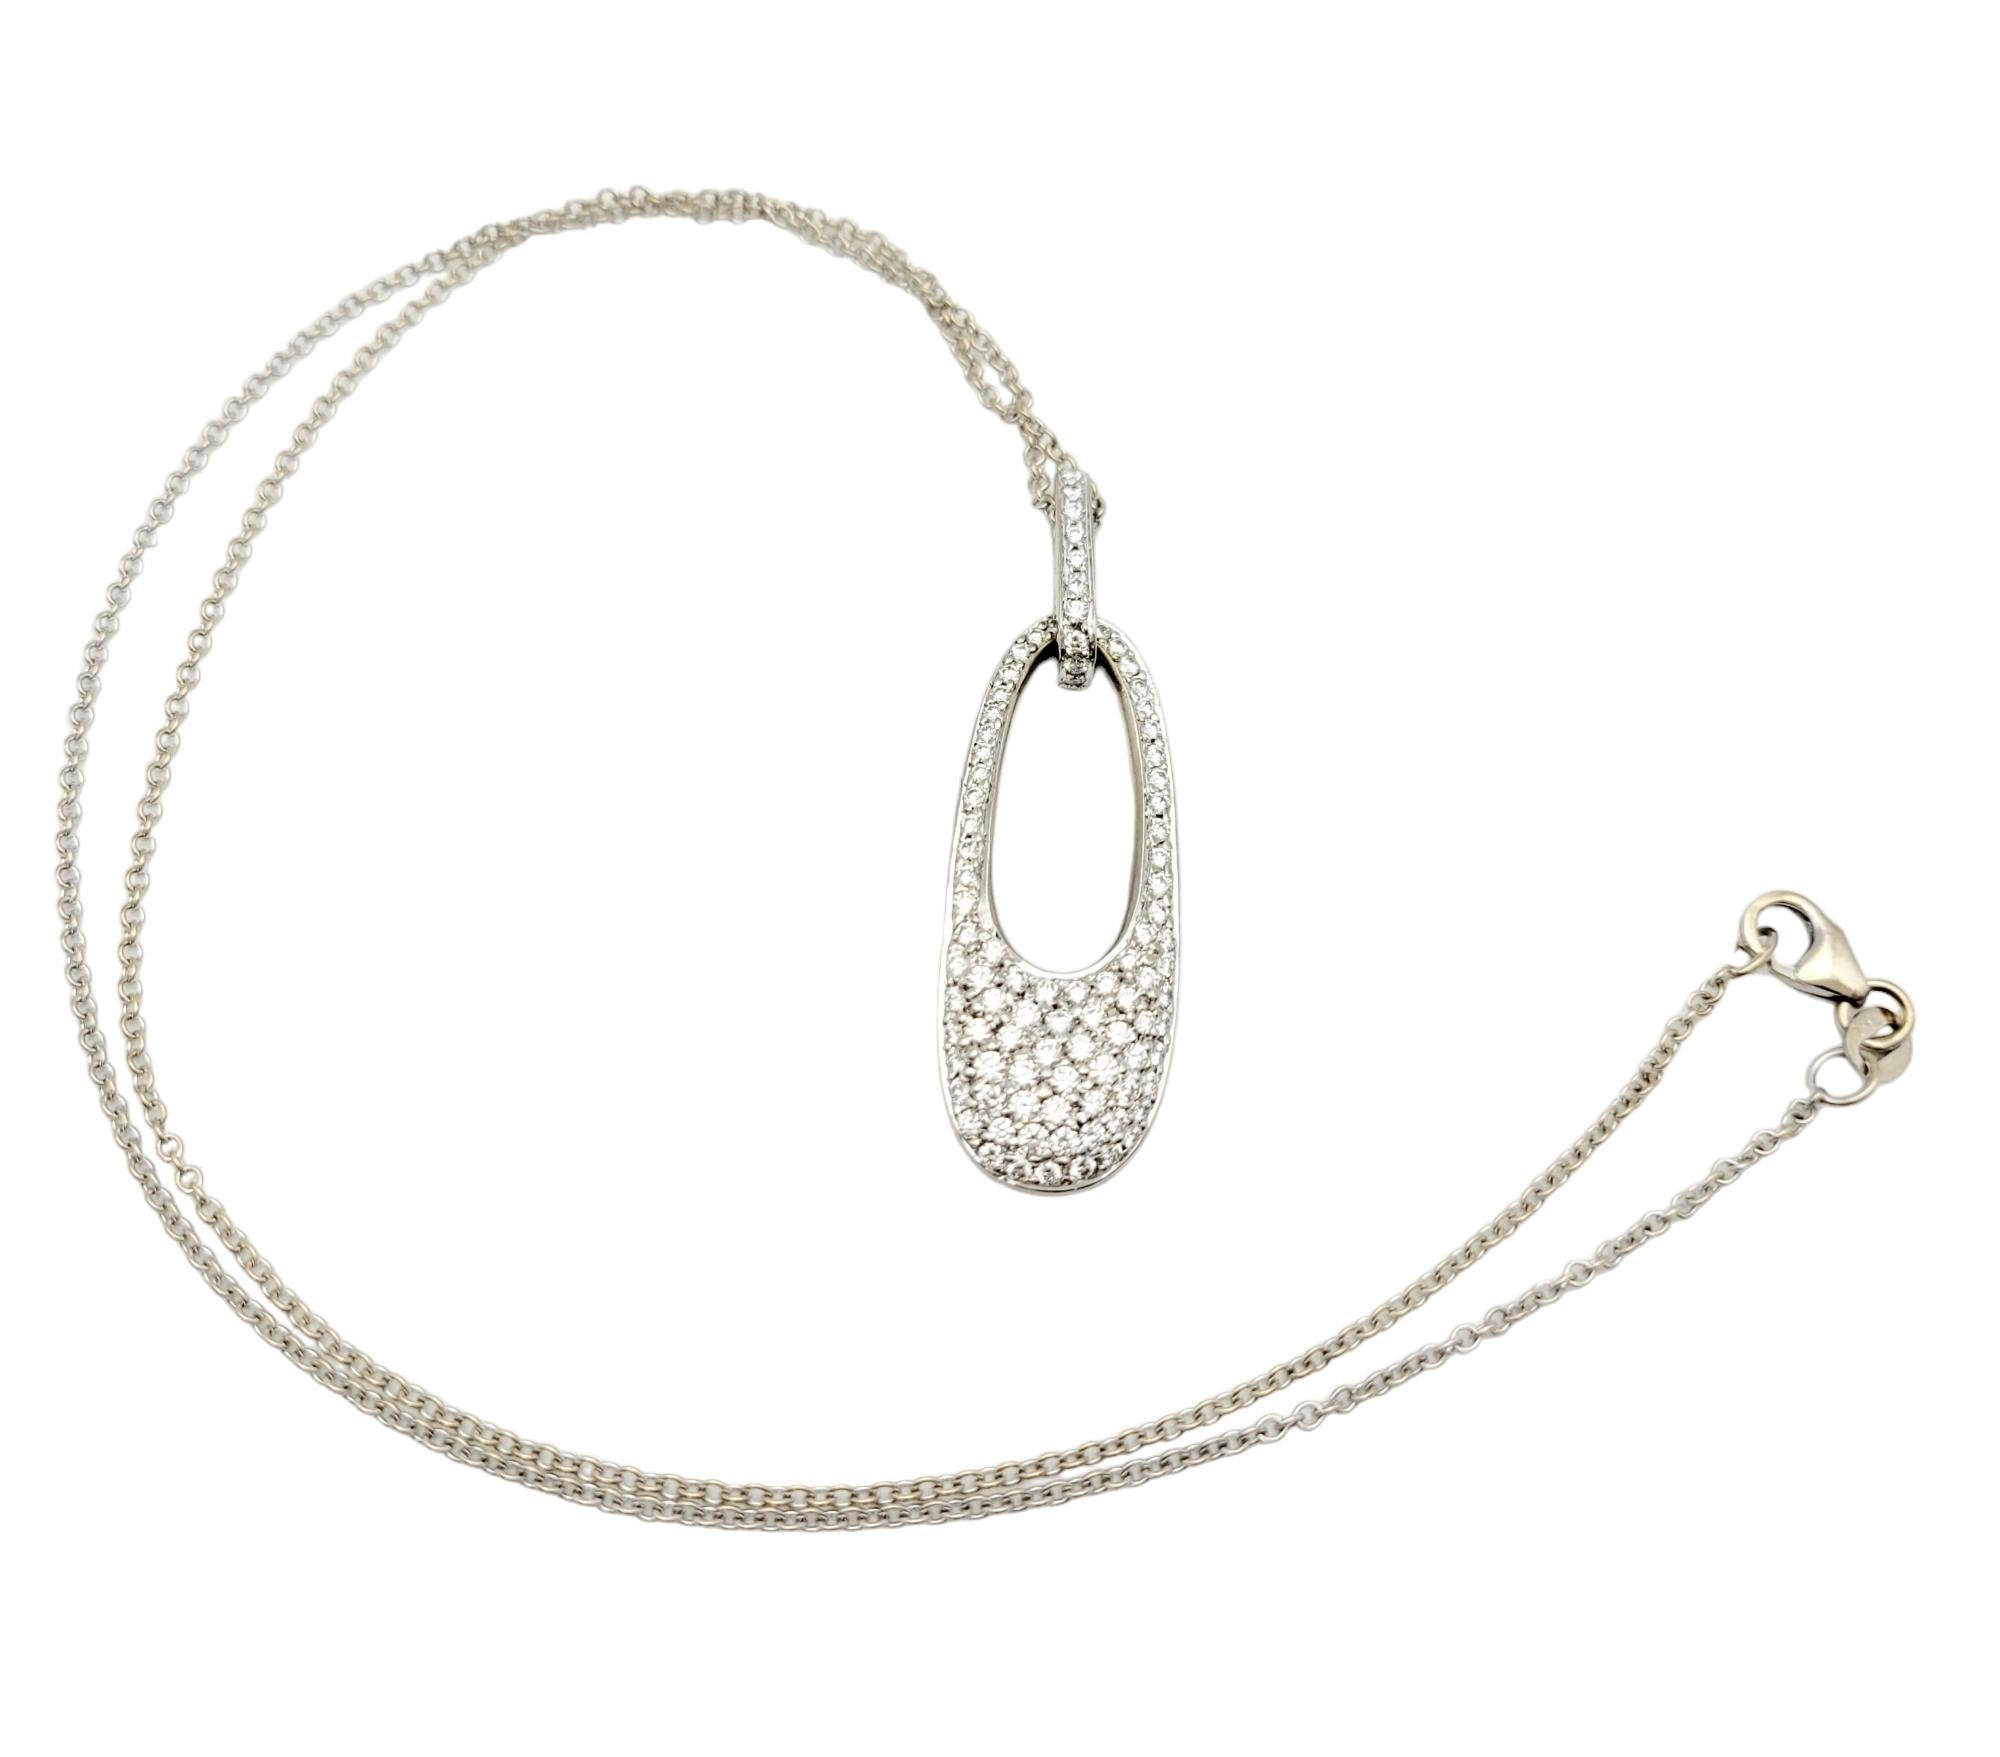 This exquisite drop pendant necklace is a radiant expression of sophistication and glamour. Crafted from lustrous 14 karat white gold, the pendant assumes the form of an elongated open oval, creating a visually captivating silhouette. The entire